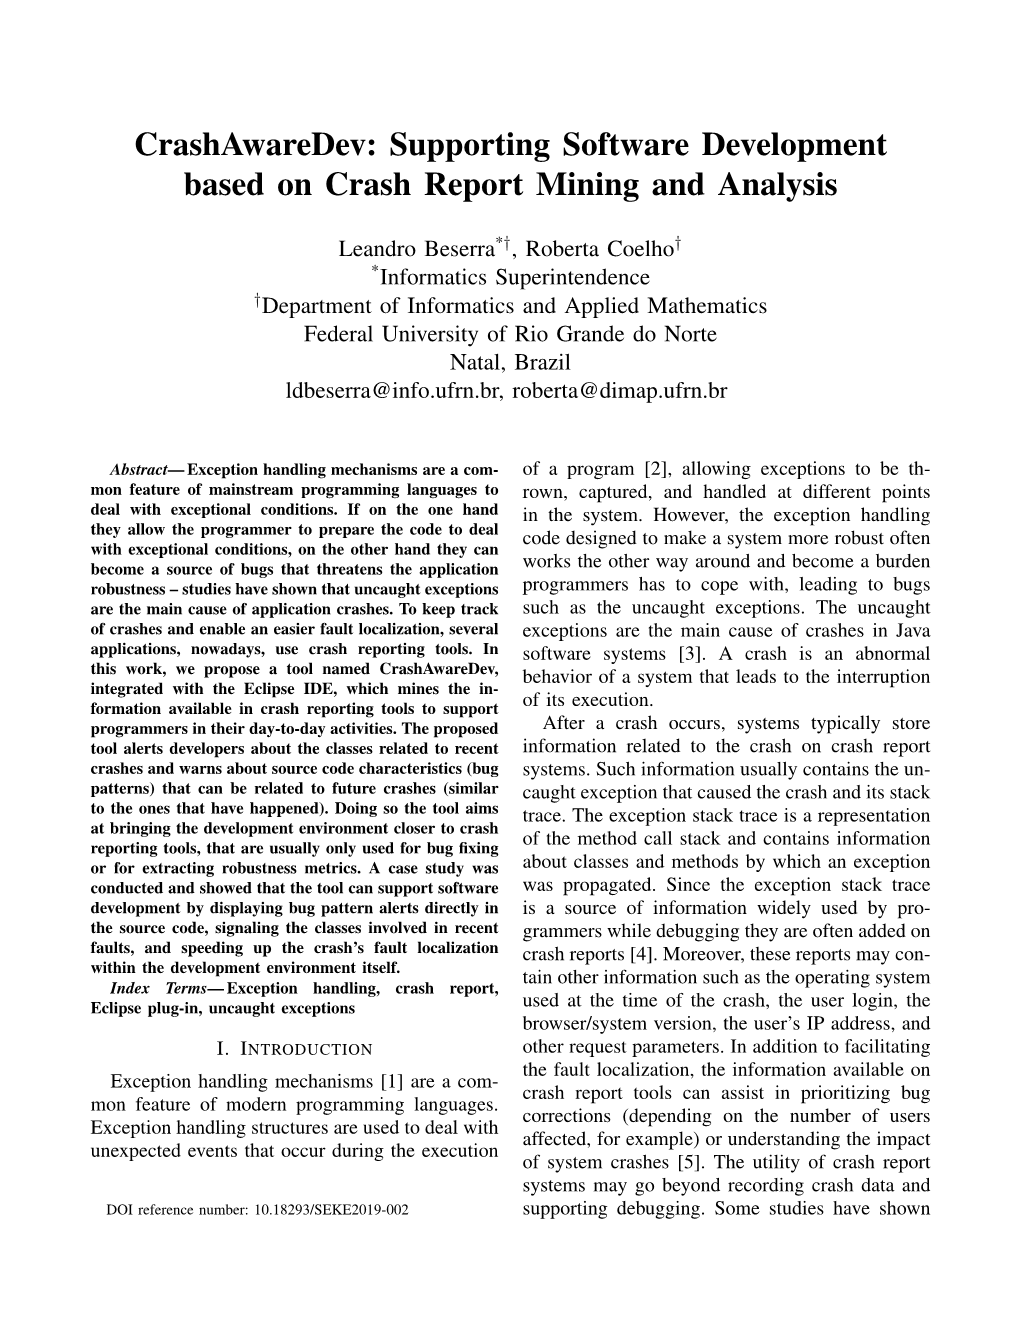 Supporting Software Development Based on Crash Report Mining and Analysis